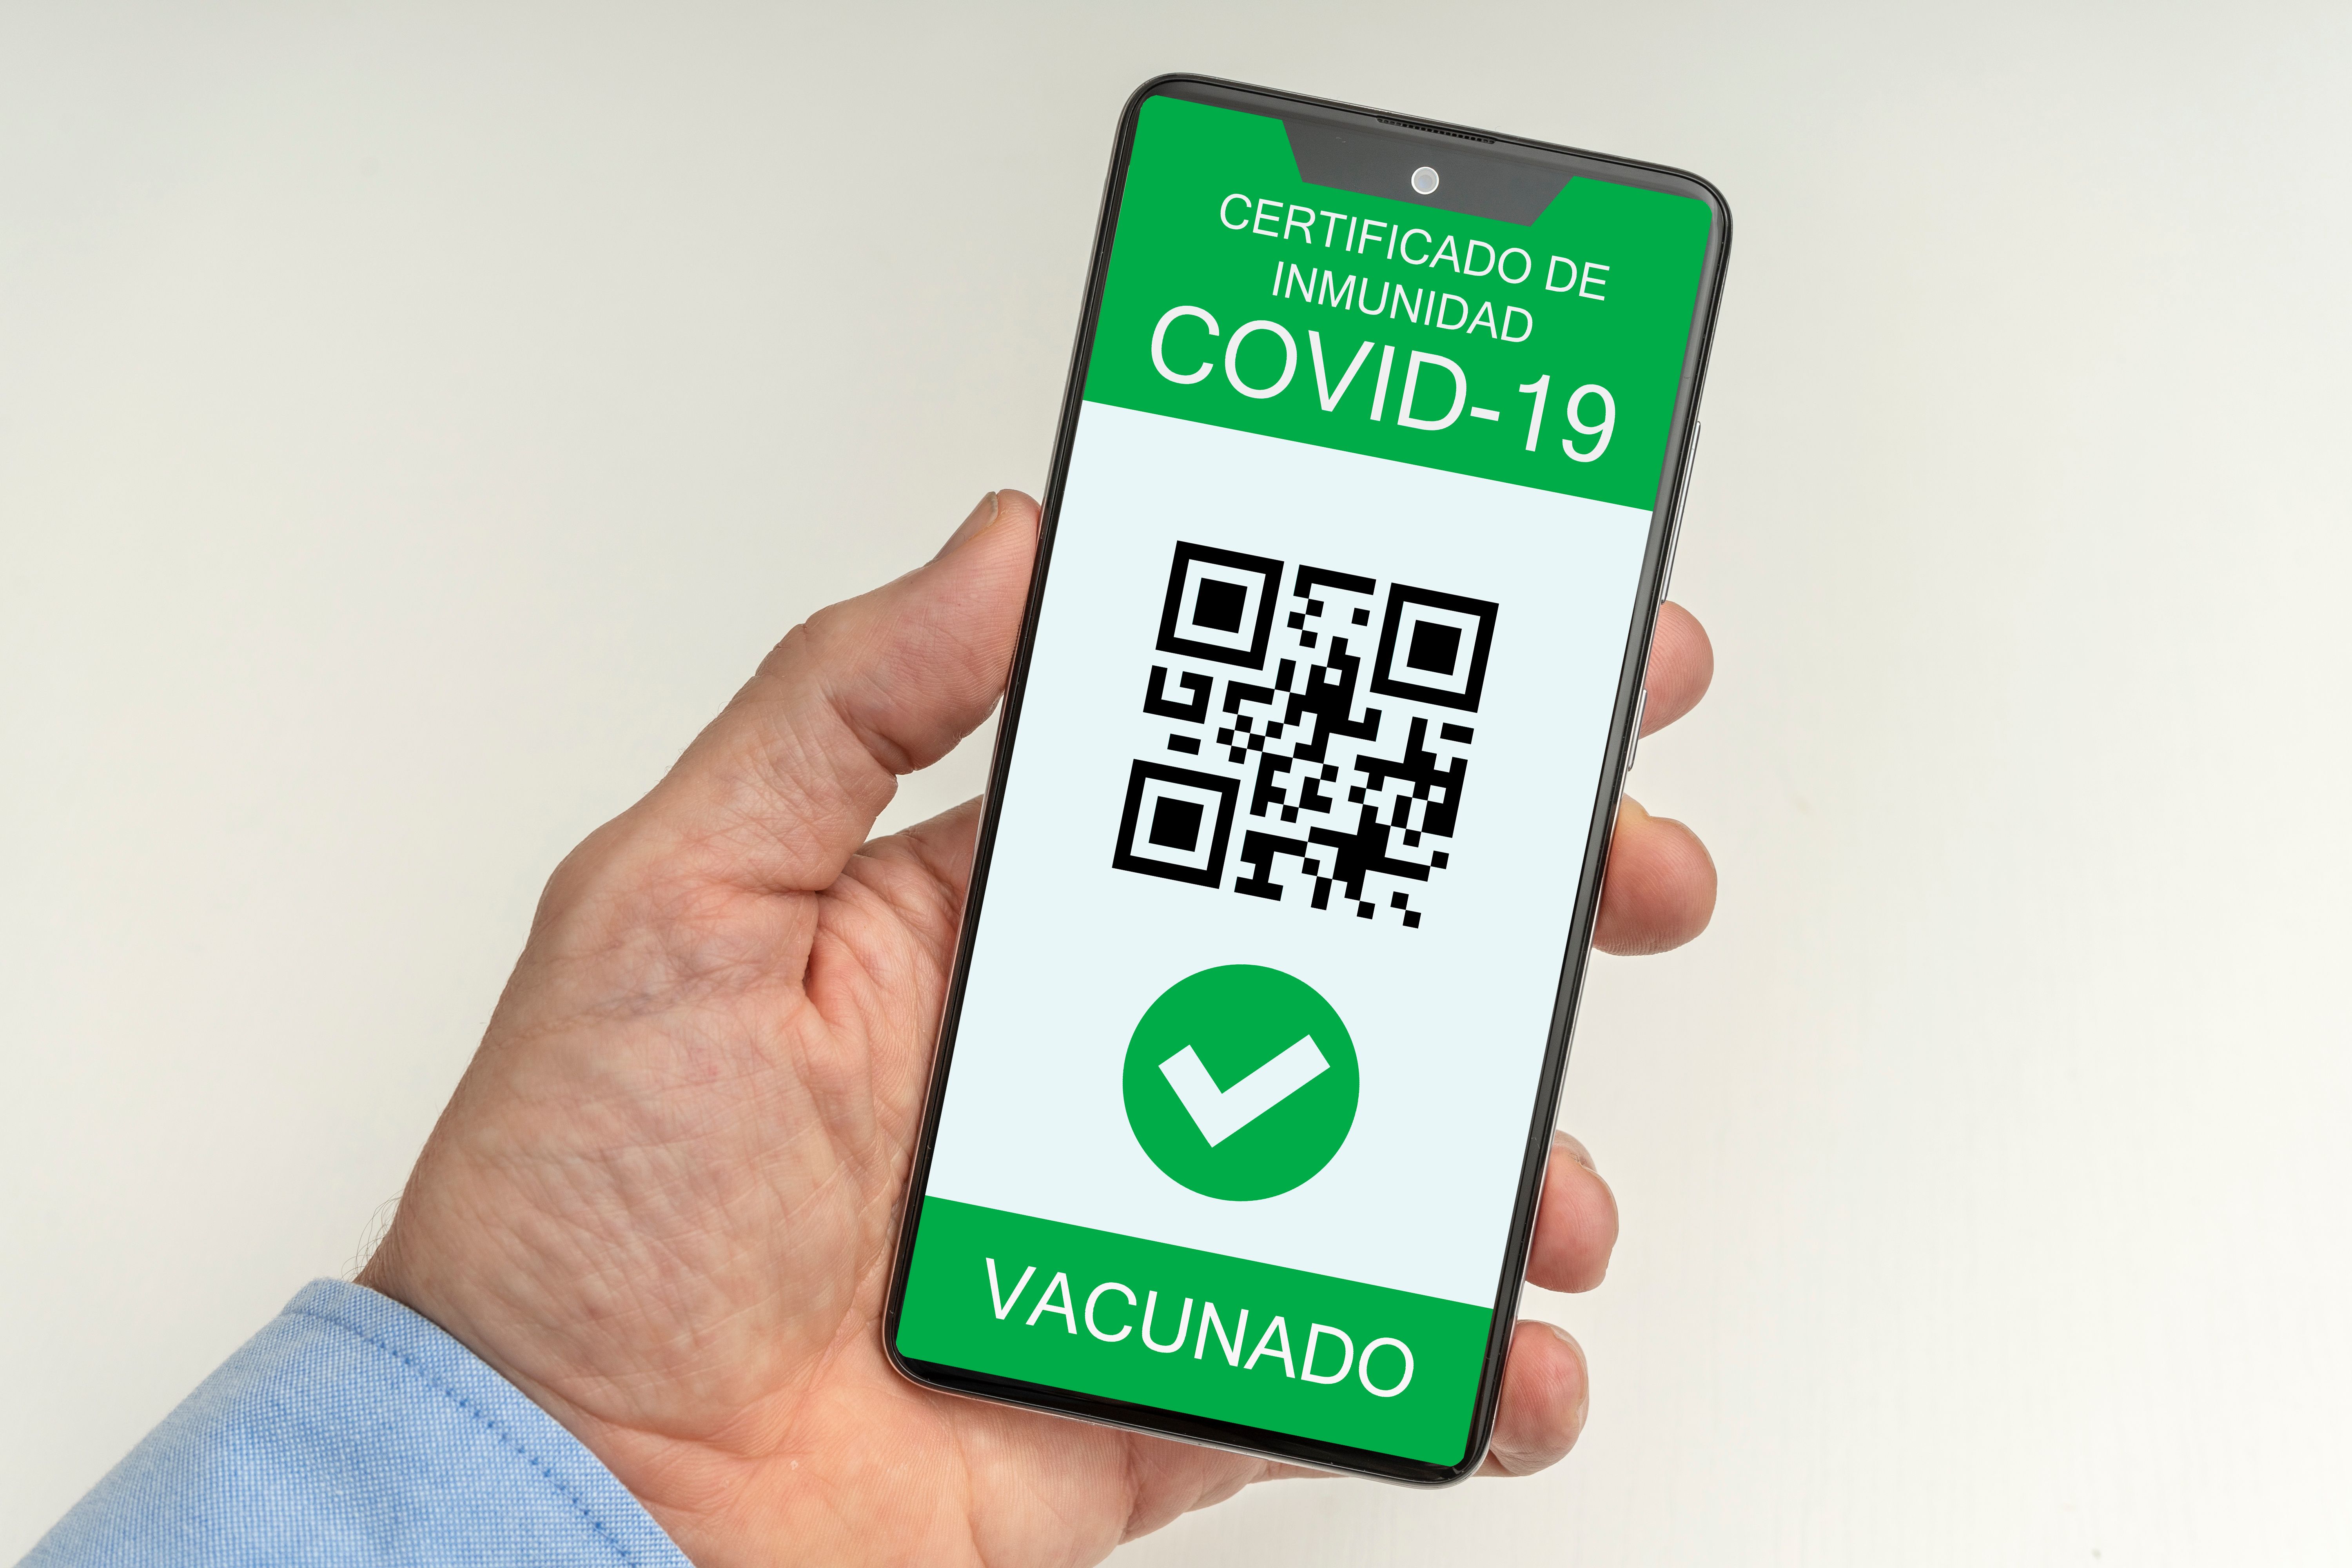 Low COVID-19 vaccination rates among Hispanic populations may be due to limited vaccine information available in Spanish.